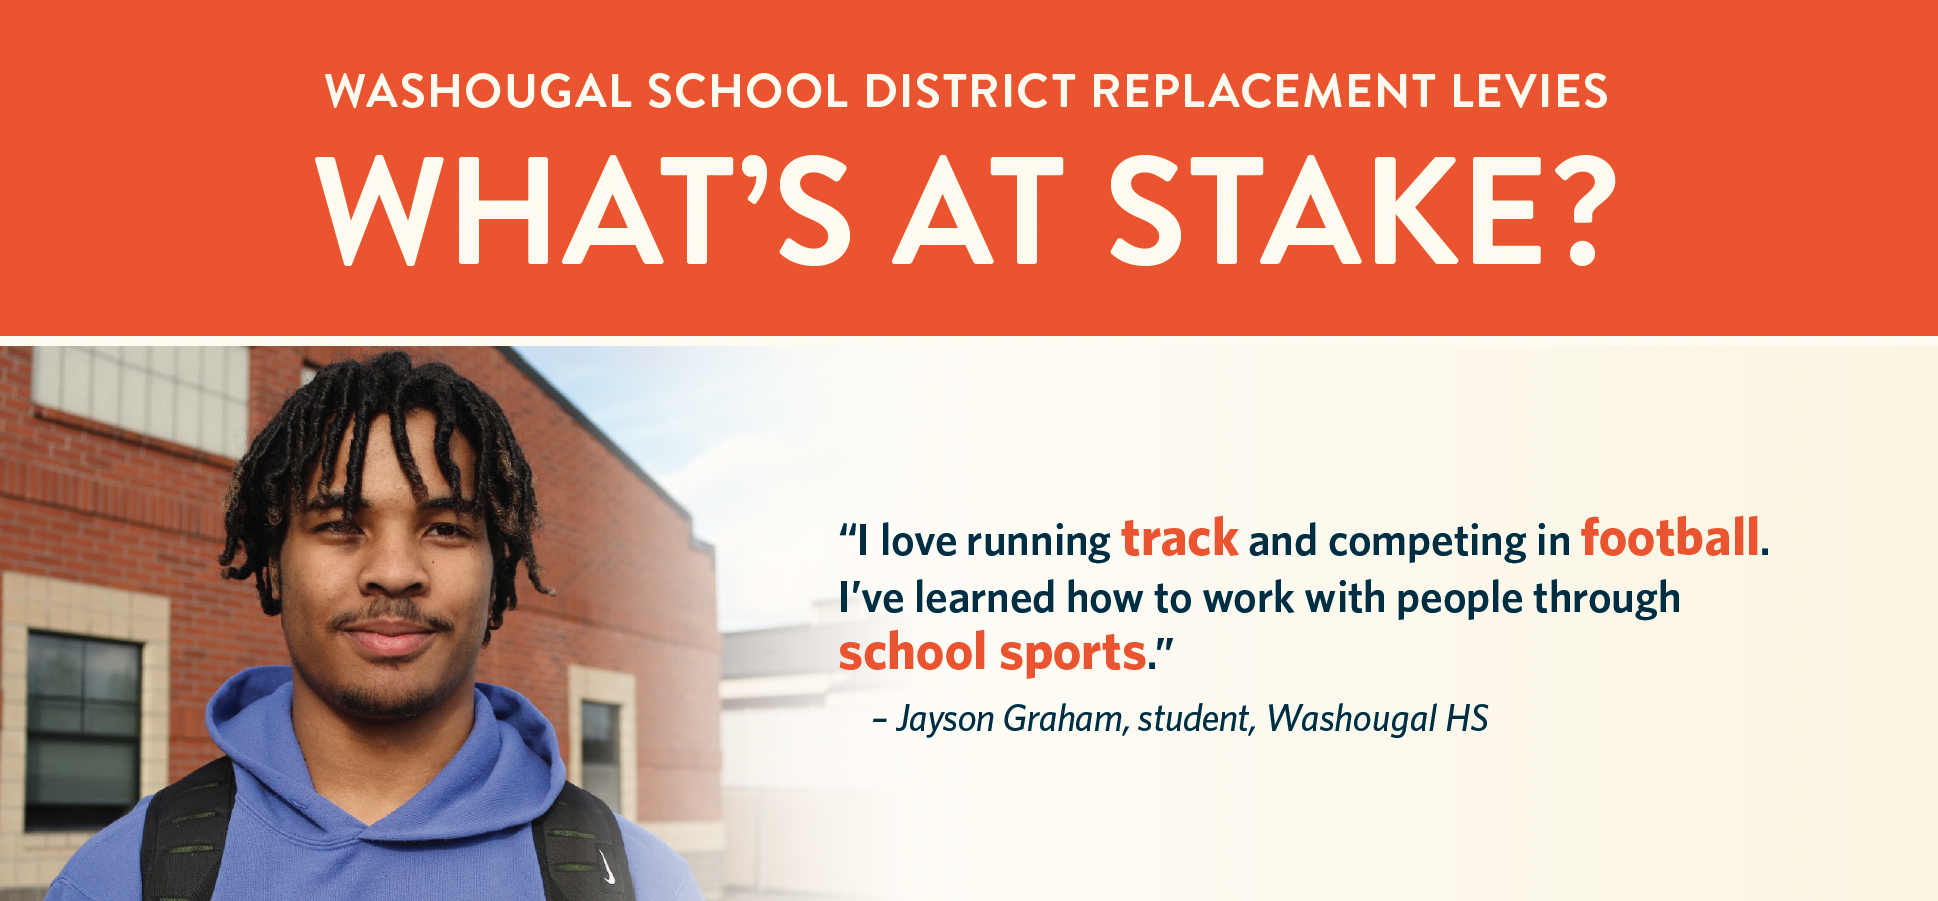 “I love running track and competing in football. I’ve learned how to work with people through school sports.” – Jayson Graham, student, Washougal HS; WSD replacement levies - what's at stake